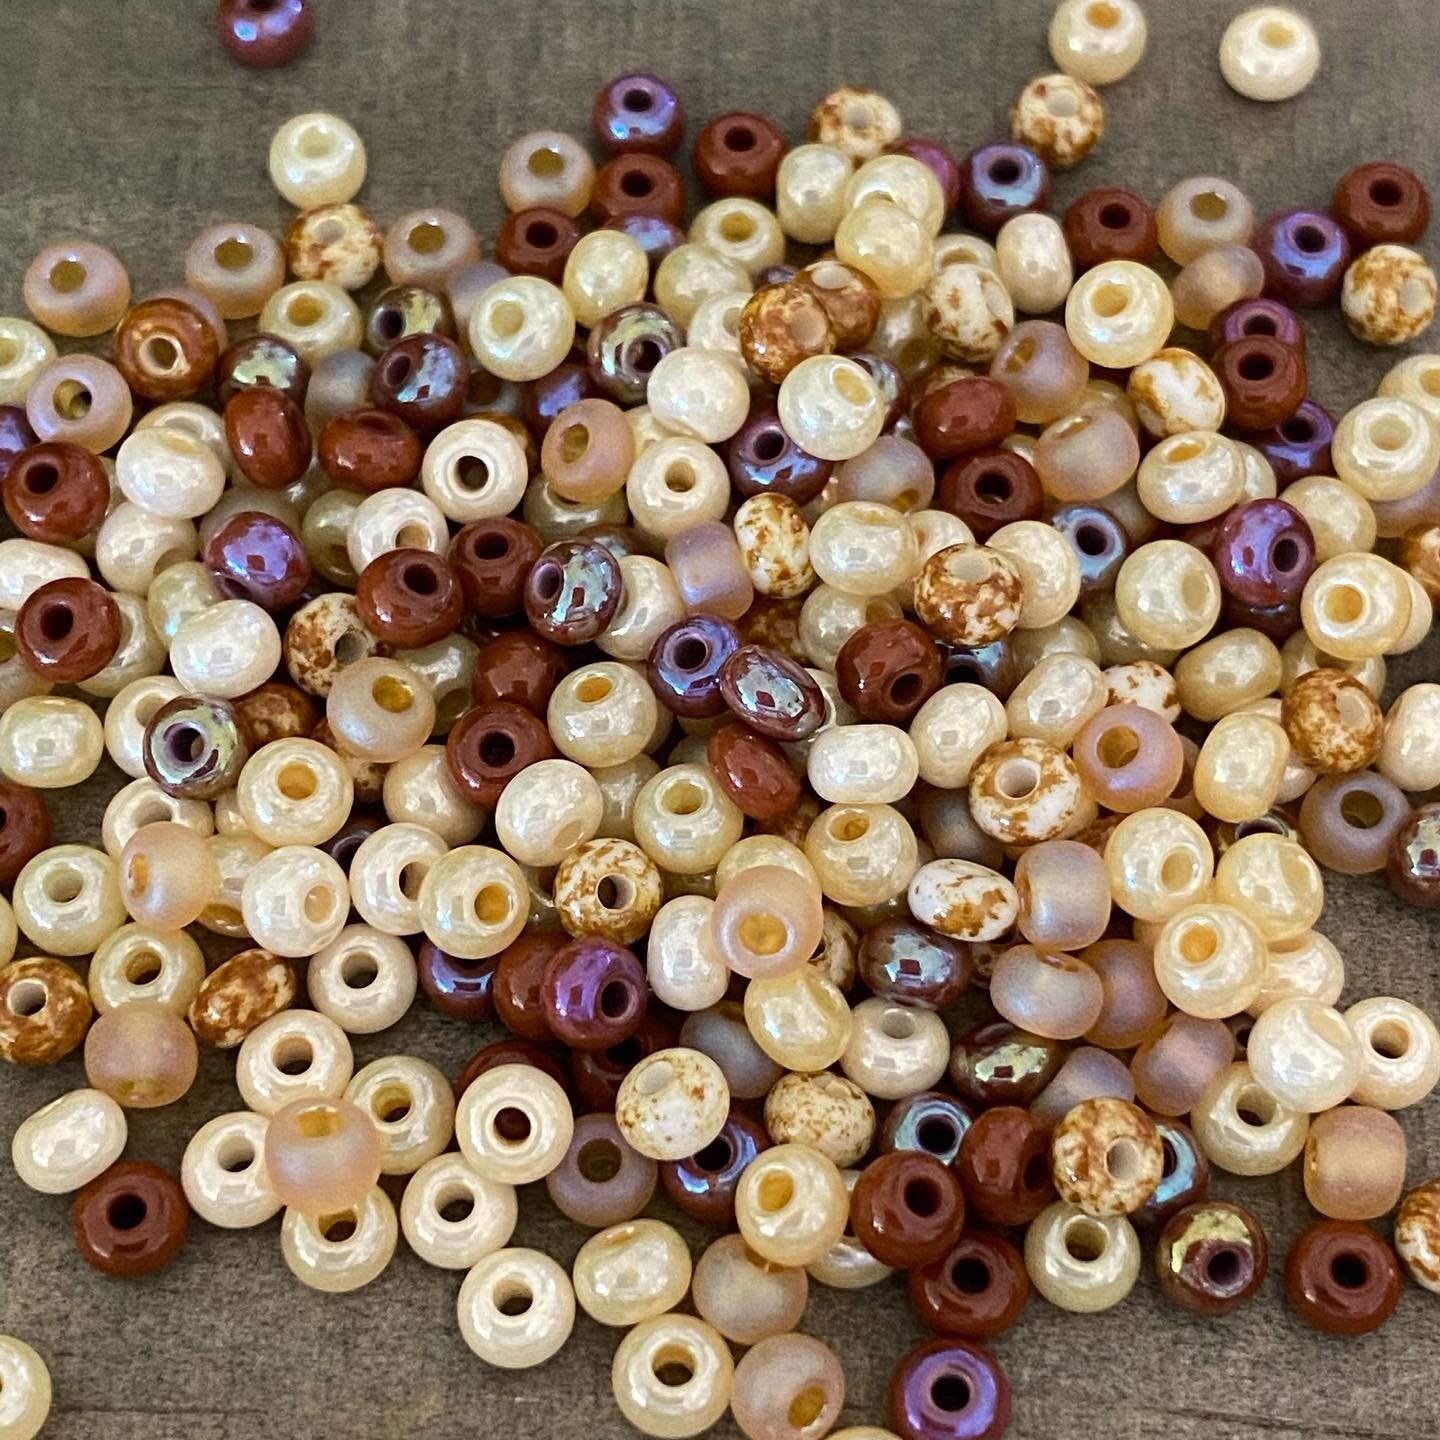 On the agenda for today &hellip; this Vicu&ntilde;a Flash mix from @johnbeadcorp is going to become a gorgeous spiral 🪴
#beautifulbeads #daniellewickesjewelry #beadweaving #seedbeads #travertinebeads #beadedjewelry #beadingsupplies